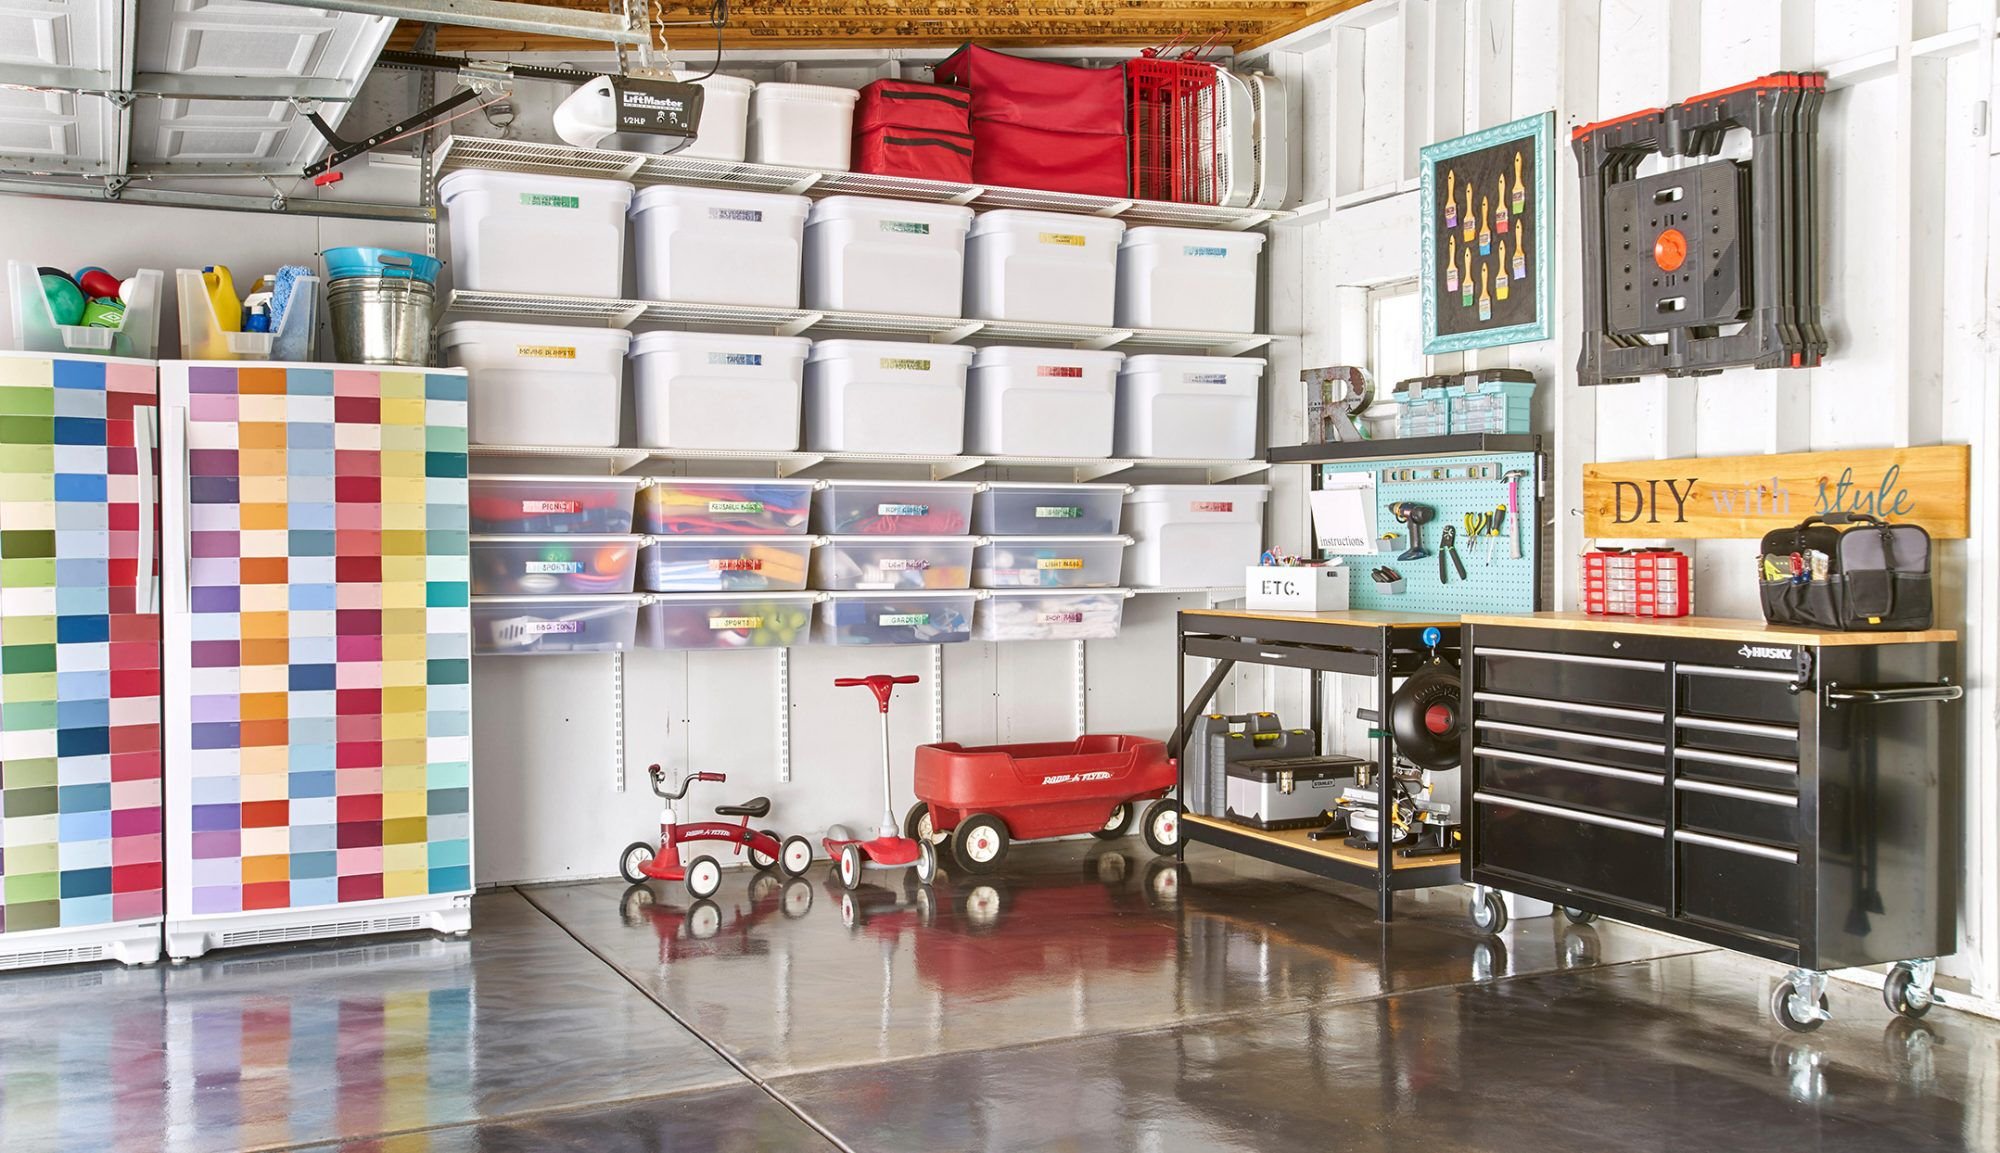 9 Things You Should Never Store in the Garage